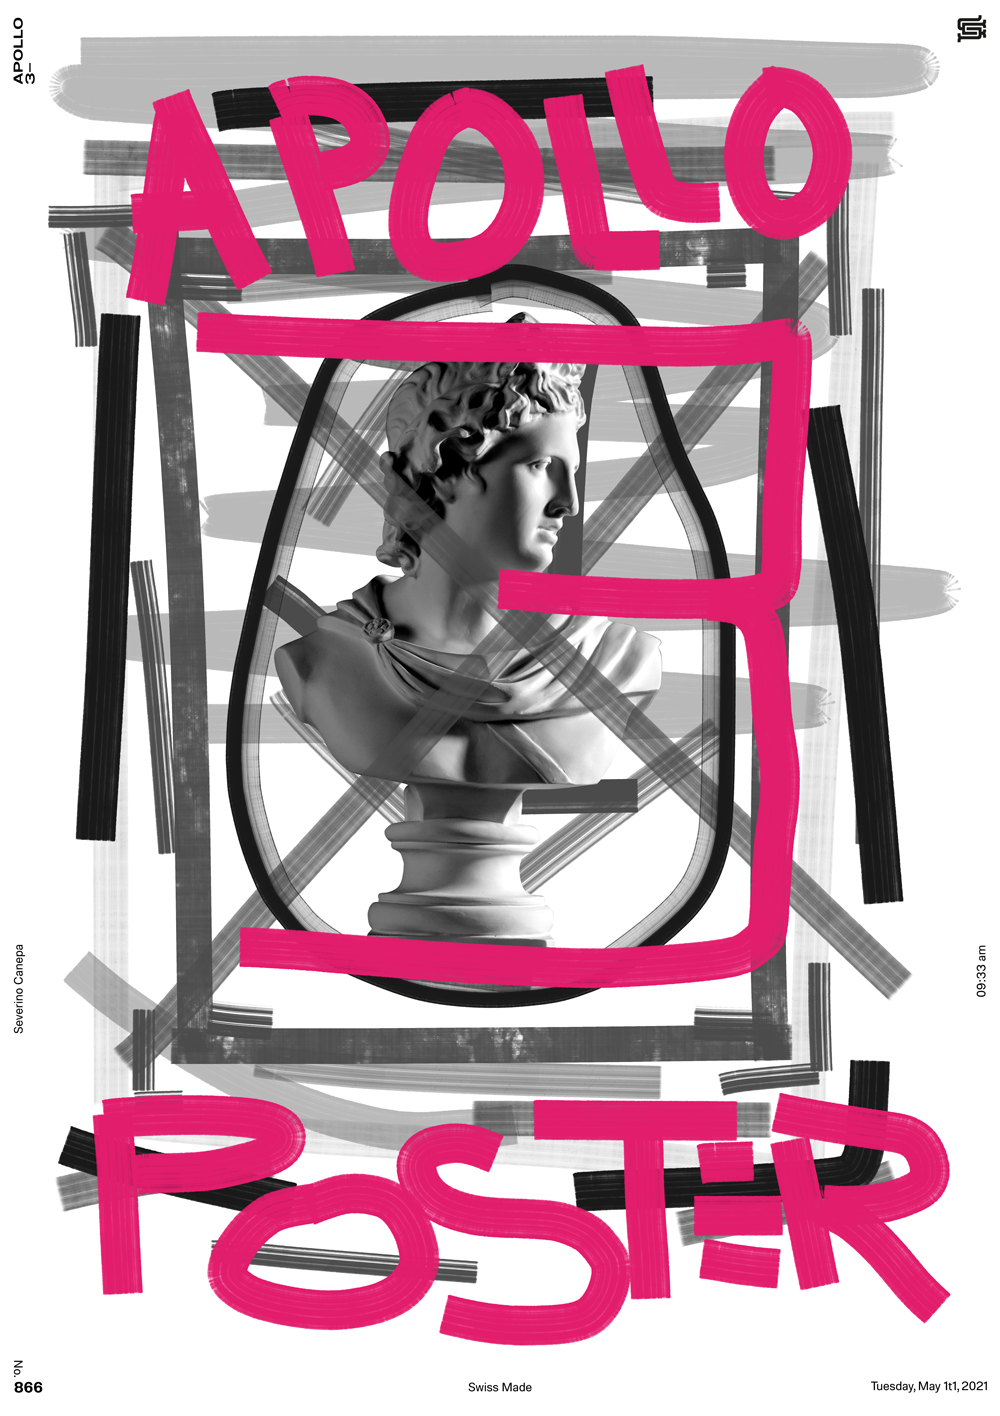 I used fake marker brushes and Apollo's Statue to design the poster number 866